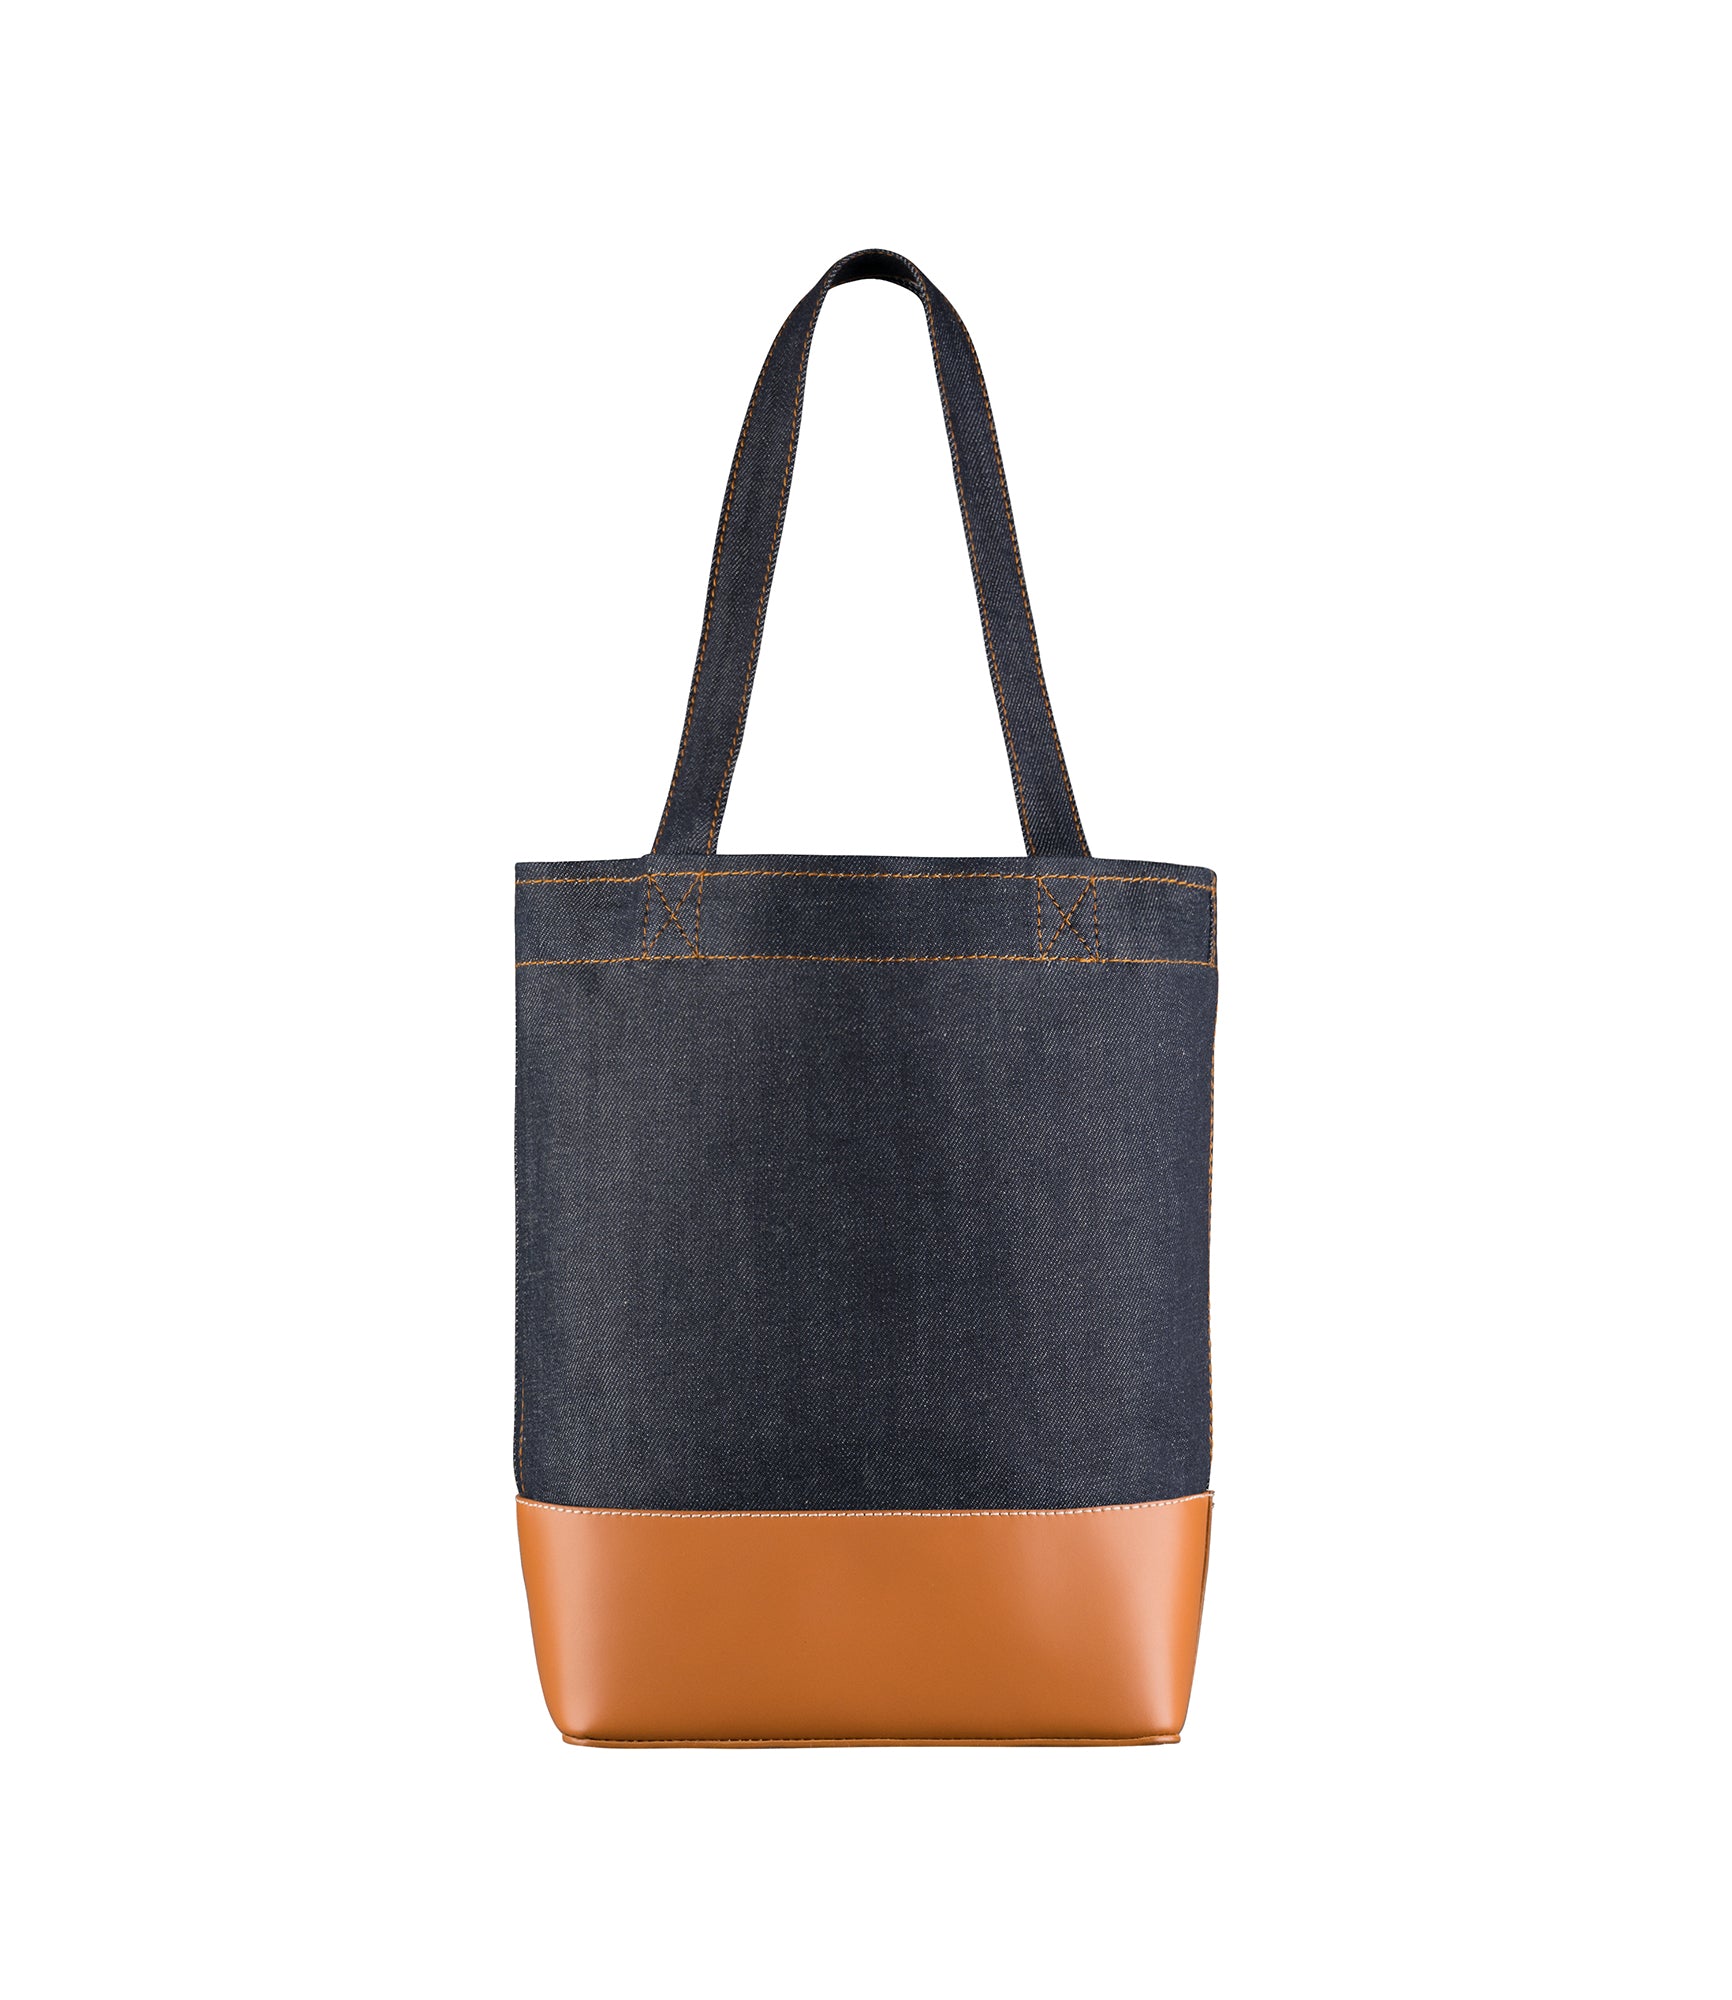 Axelle tote bag | Japanese Denim and smooth leather | A.P.C. Accessories